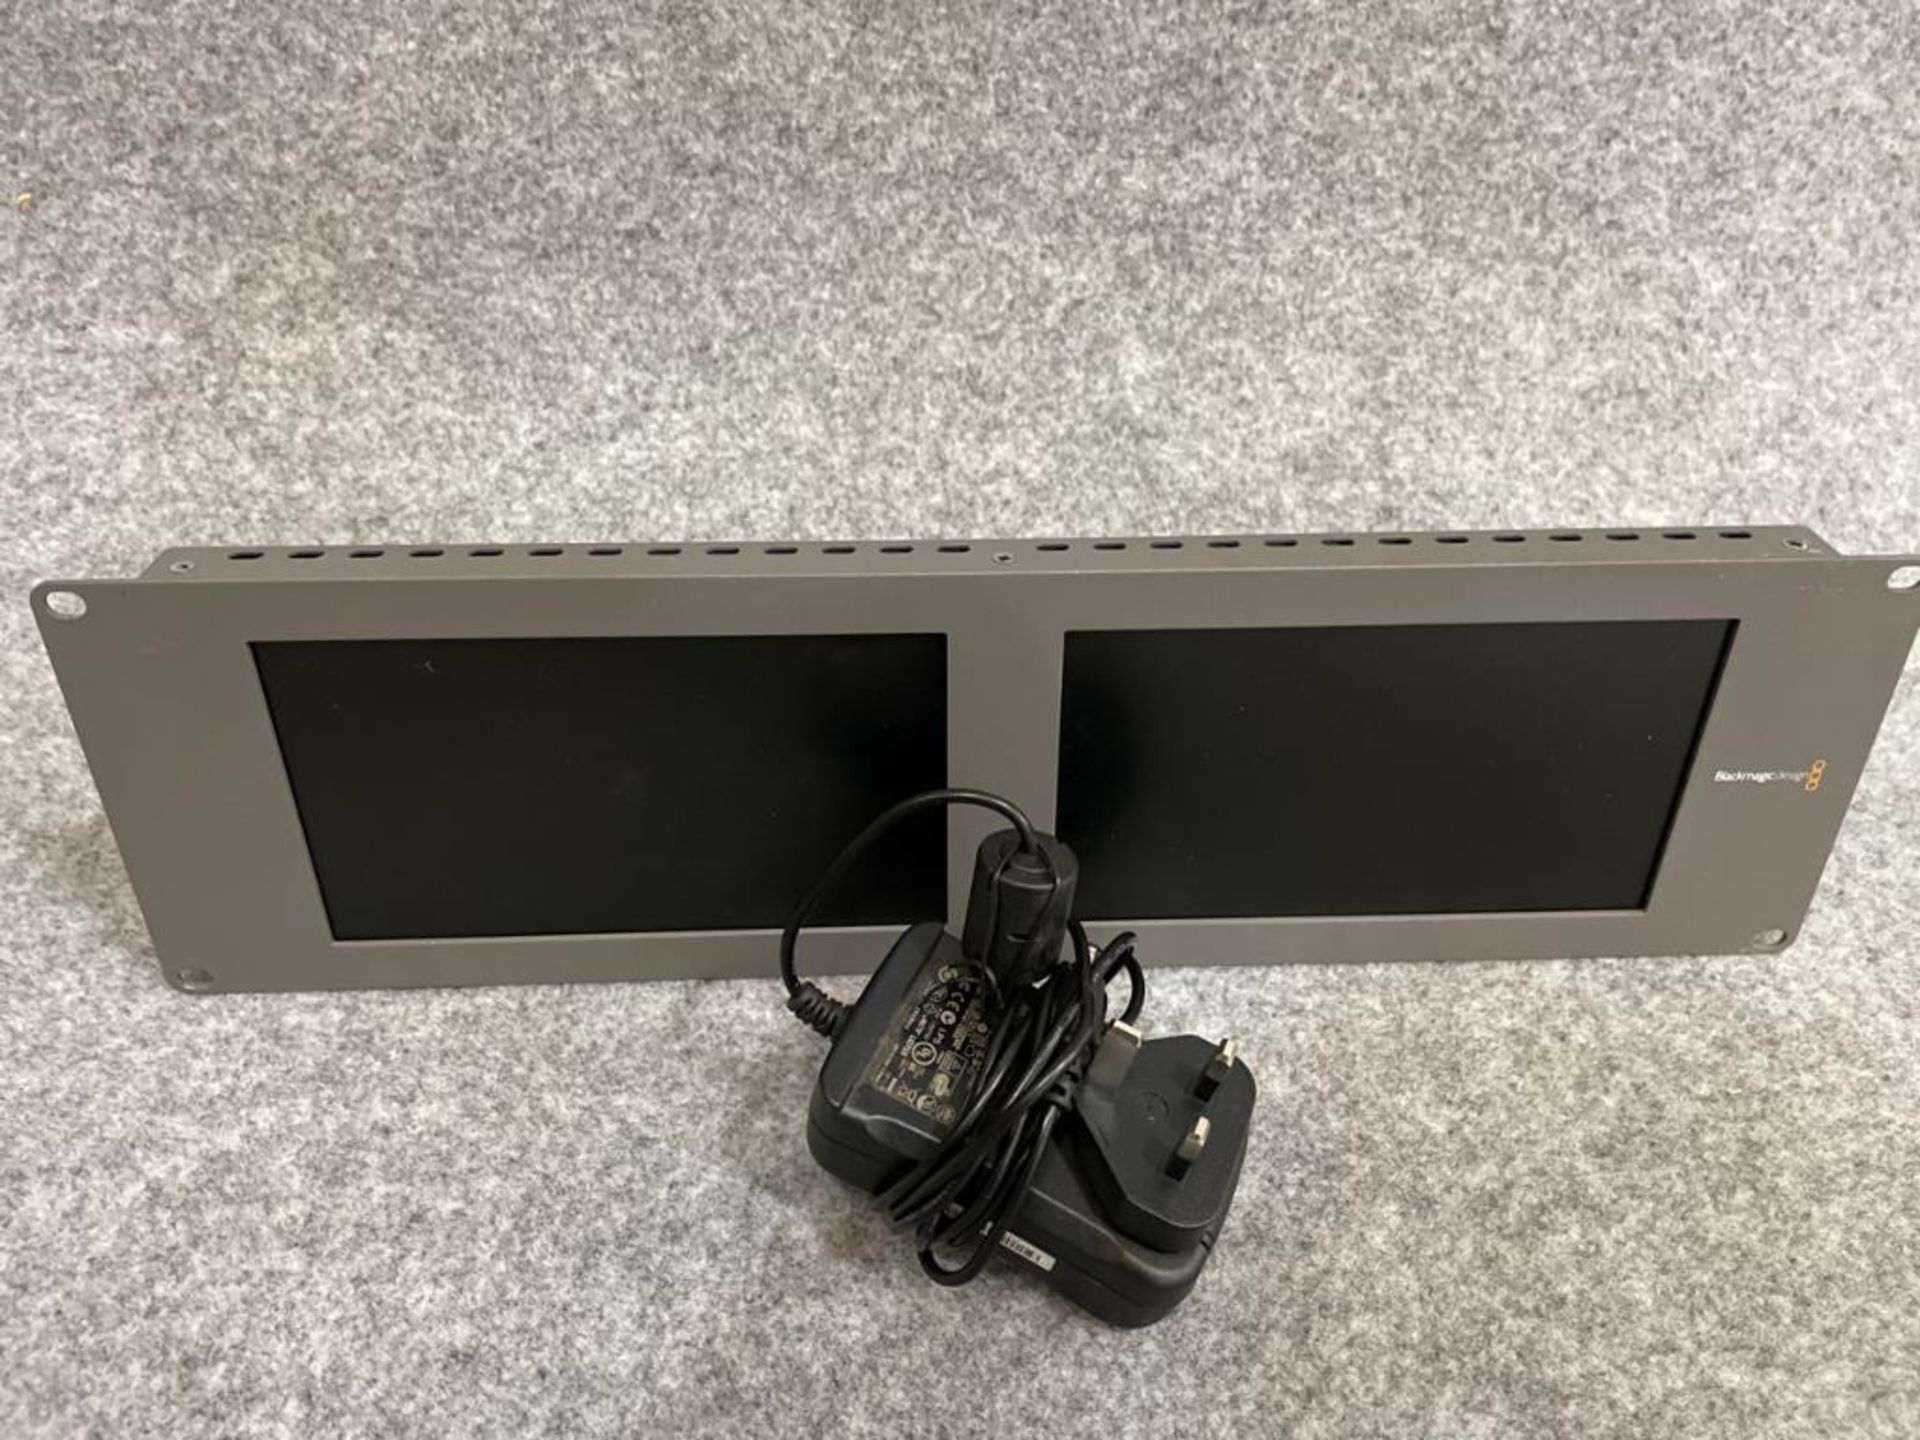 BlackMagic Dual HD Monitor with power supply SN:1391893 - Image 3 of 3